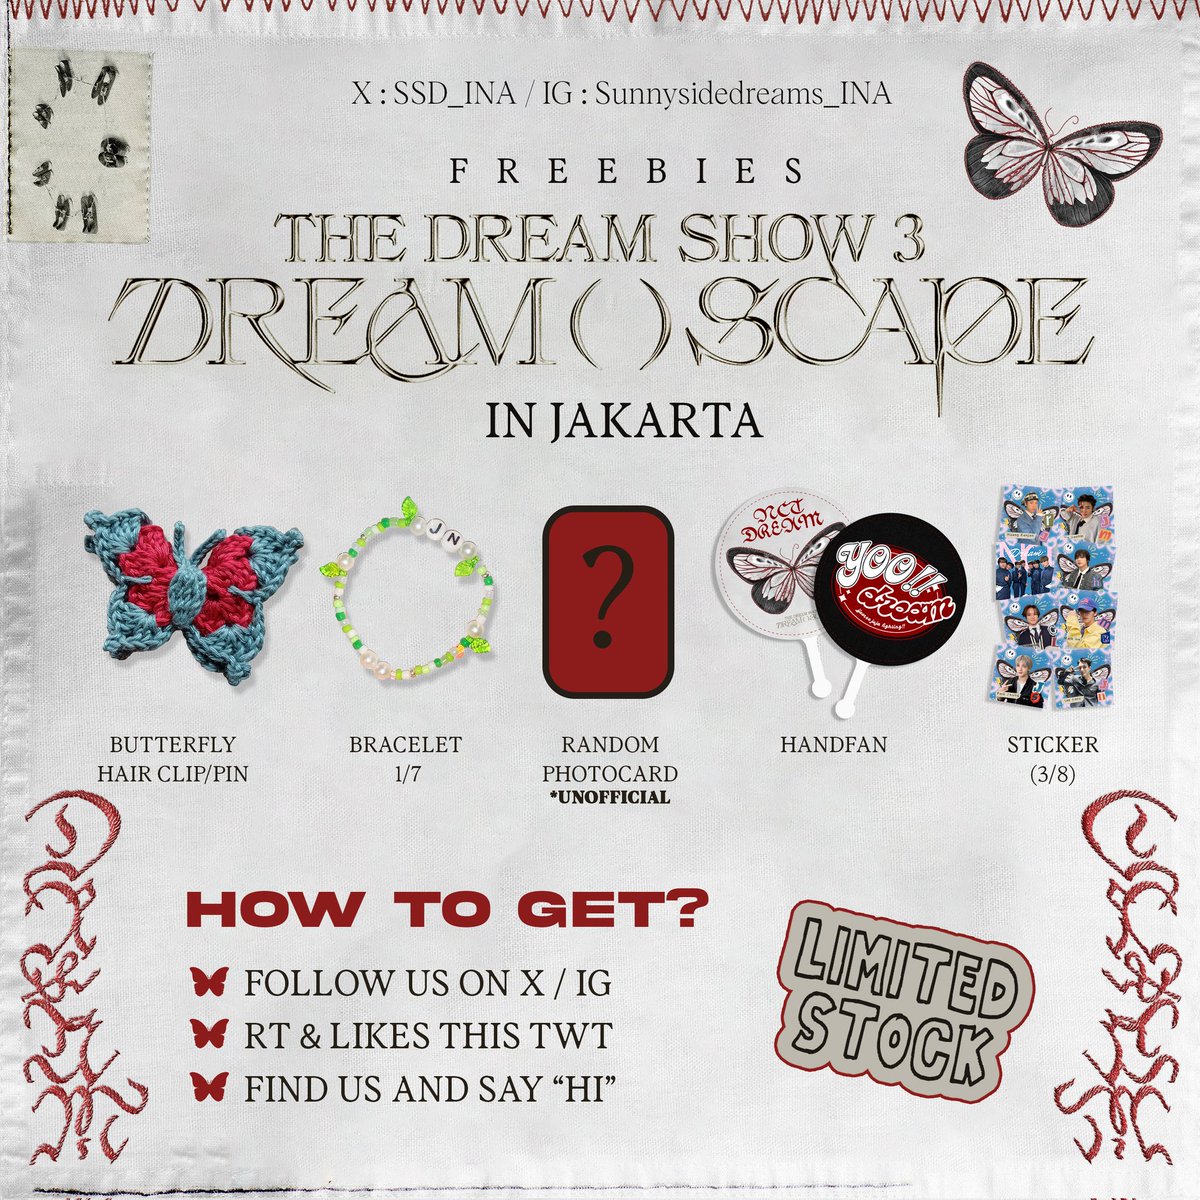 ⋆⭒˚. THE DREAM SHOW 3 IN JAKARTA FREEBIES by @SSD_INA  ೀ⋆｡˚

📍GBK , stadium 
🗓 18 May 2024
🕐 to be announced 
💌 limited qty

retweet / like are appreciatedᰔᩚ

See u there (˵ •̀ ᴗ - ˵ ) ✧